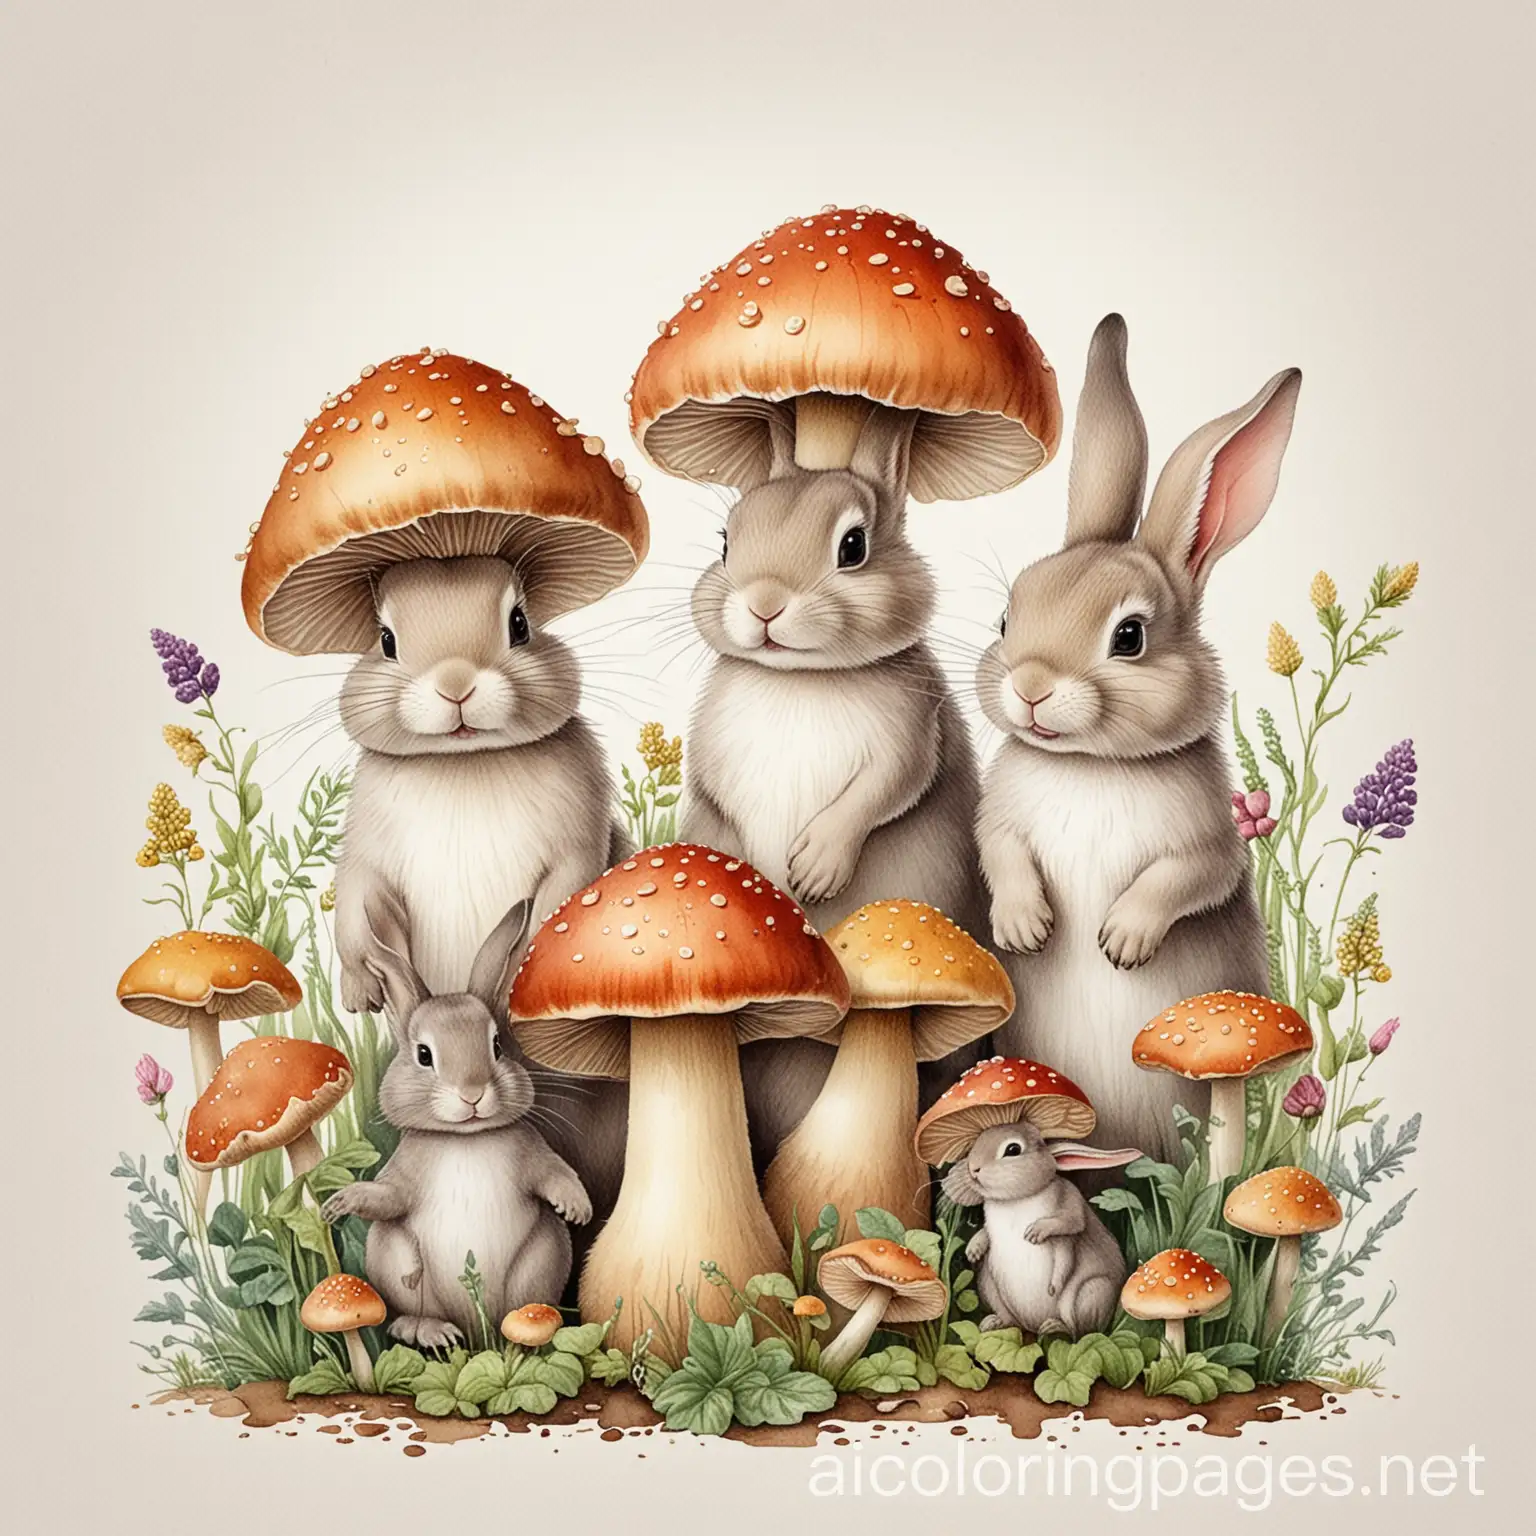 Watercolor-Illustration-of-Vintage-Mushrooms-with-Three-Bunny-Rabbits-Coloring-Page